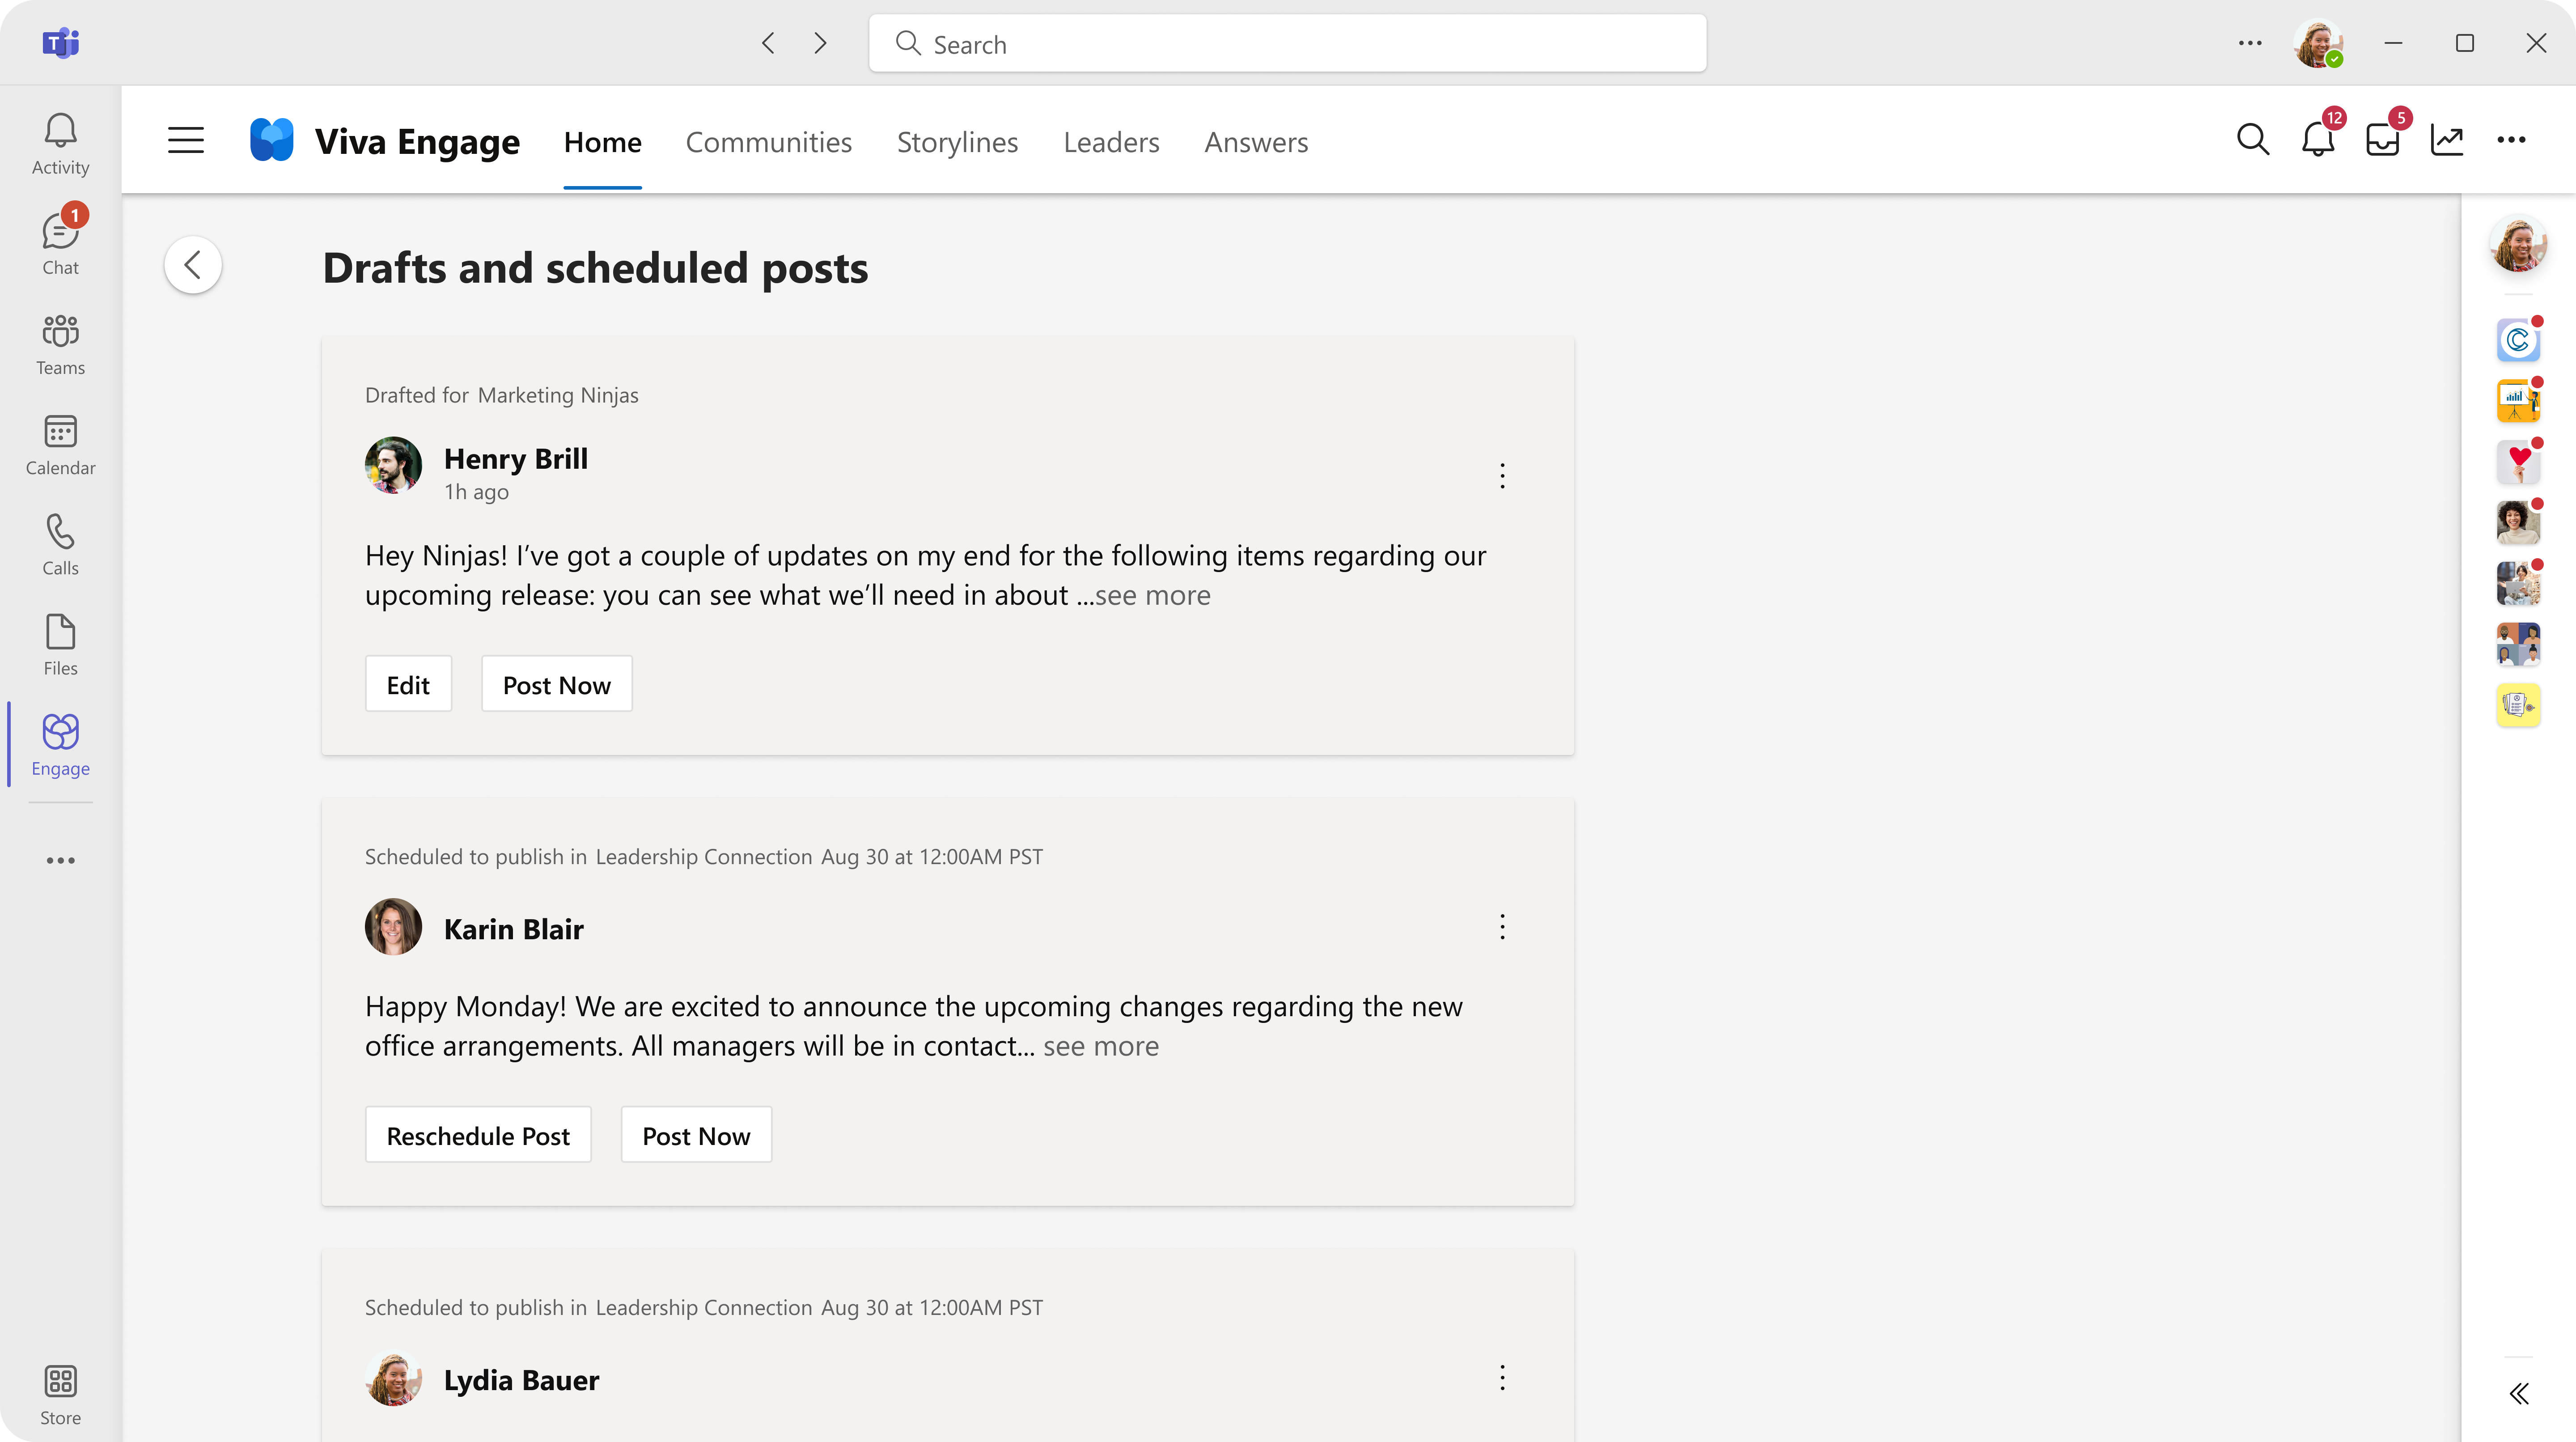 Screenshot showing the community page with the expanded panel from which you can access all drafts. and scheduled posts.